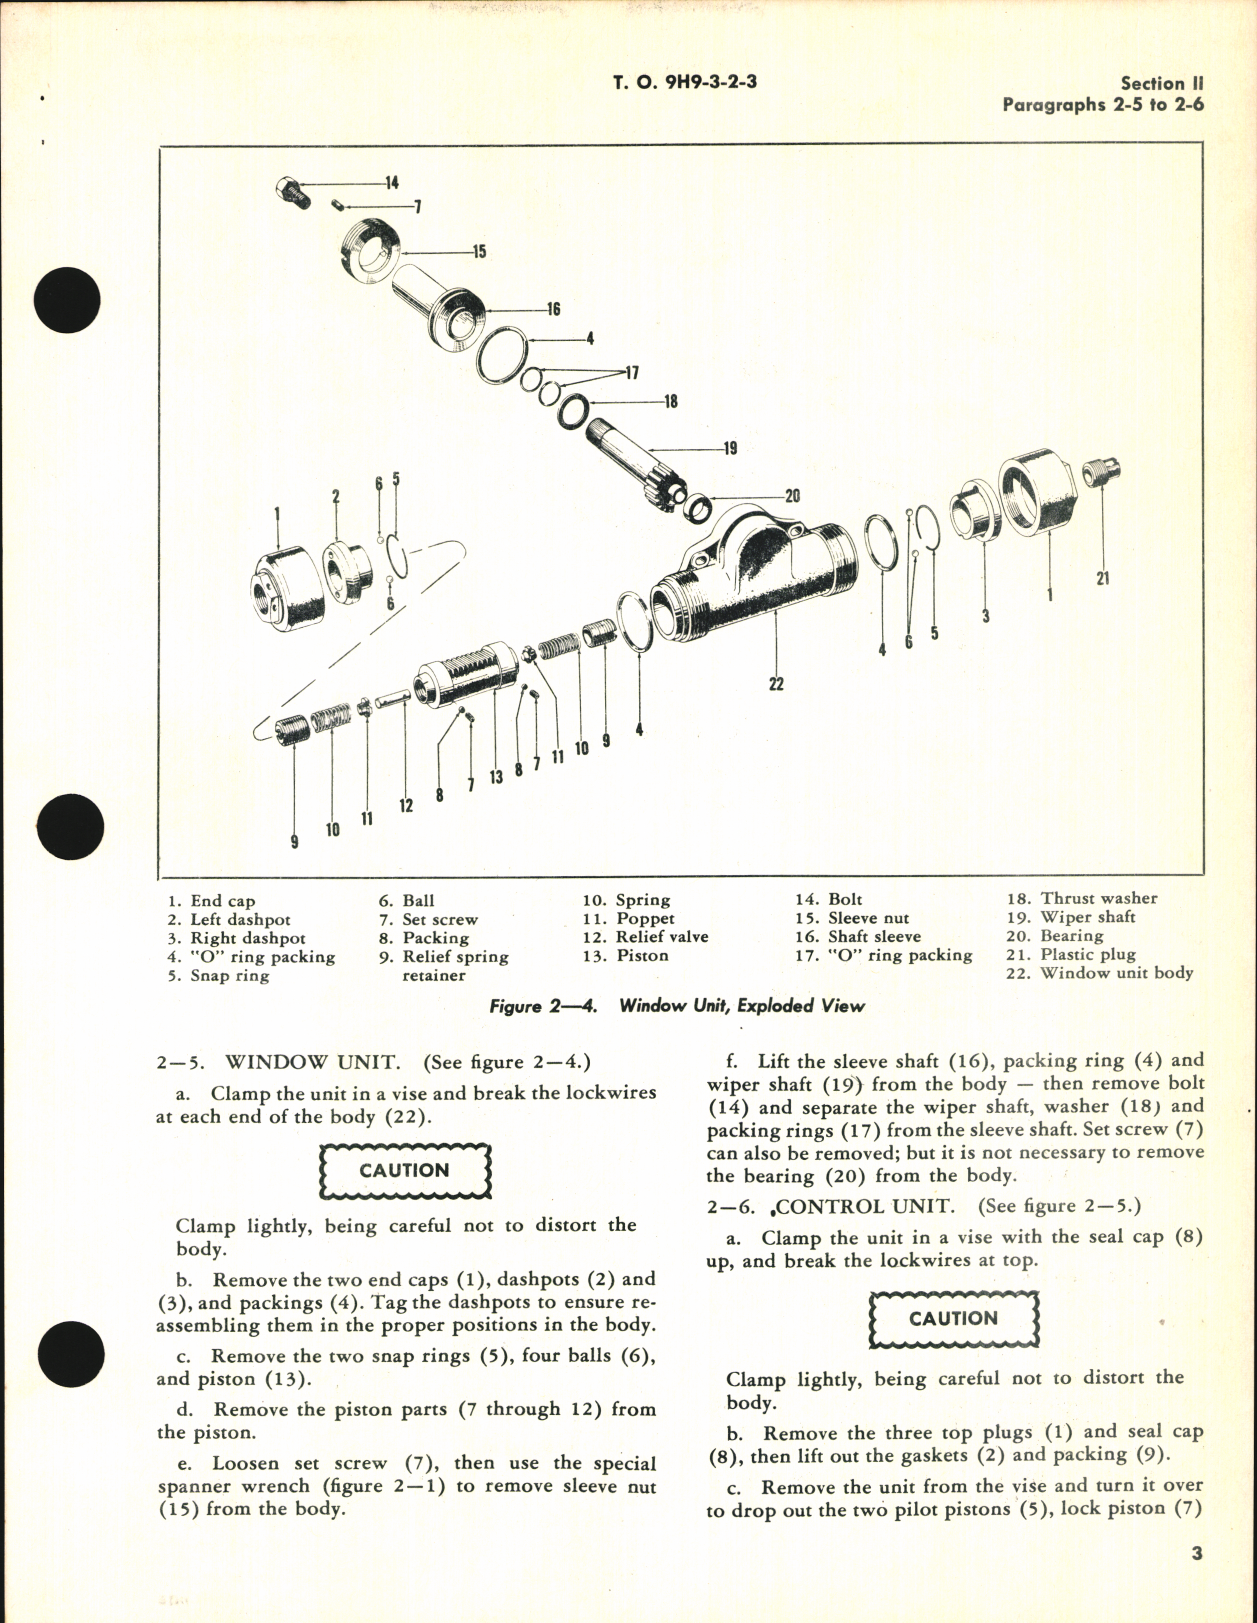 Sample page 5 from AirCorps Library document: Handbook of Overhaul Instructions for Hydraulic Windshield Wipers 